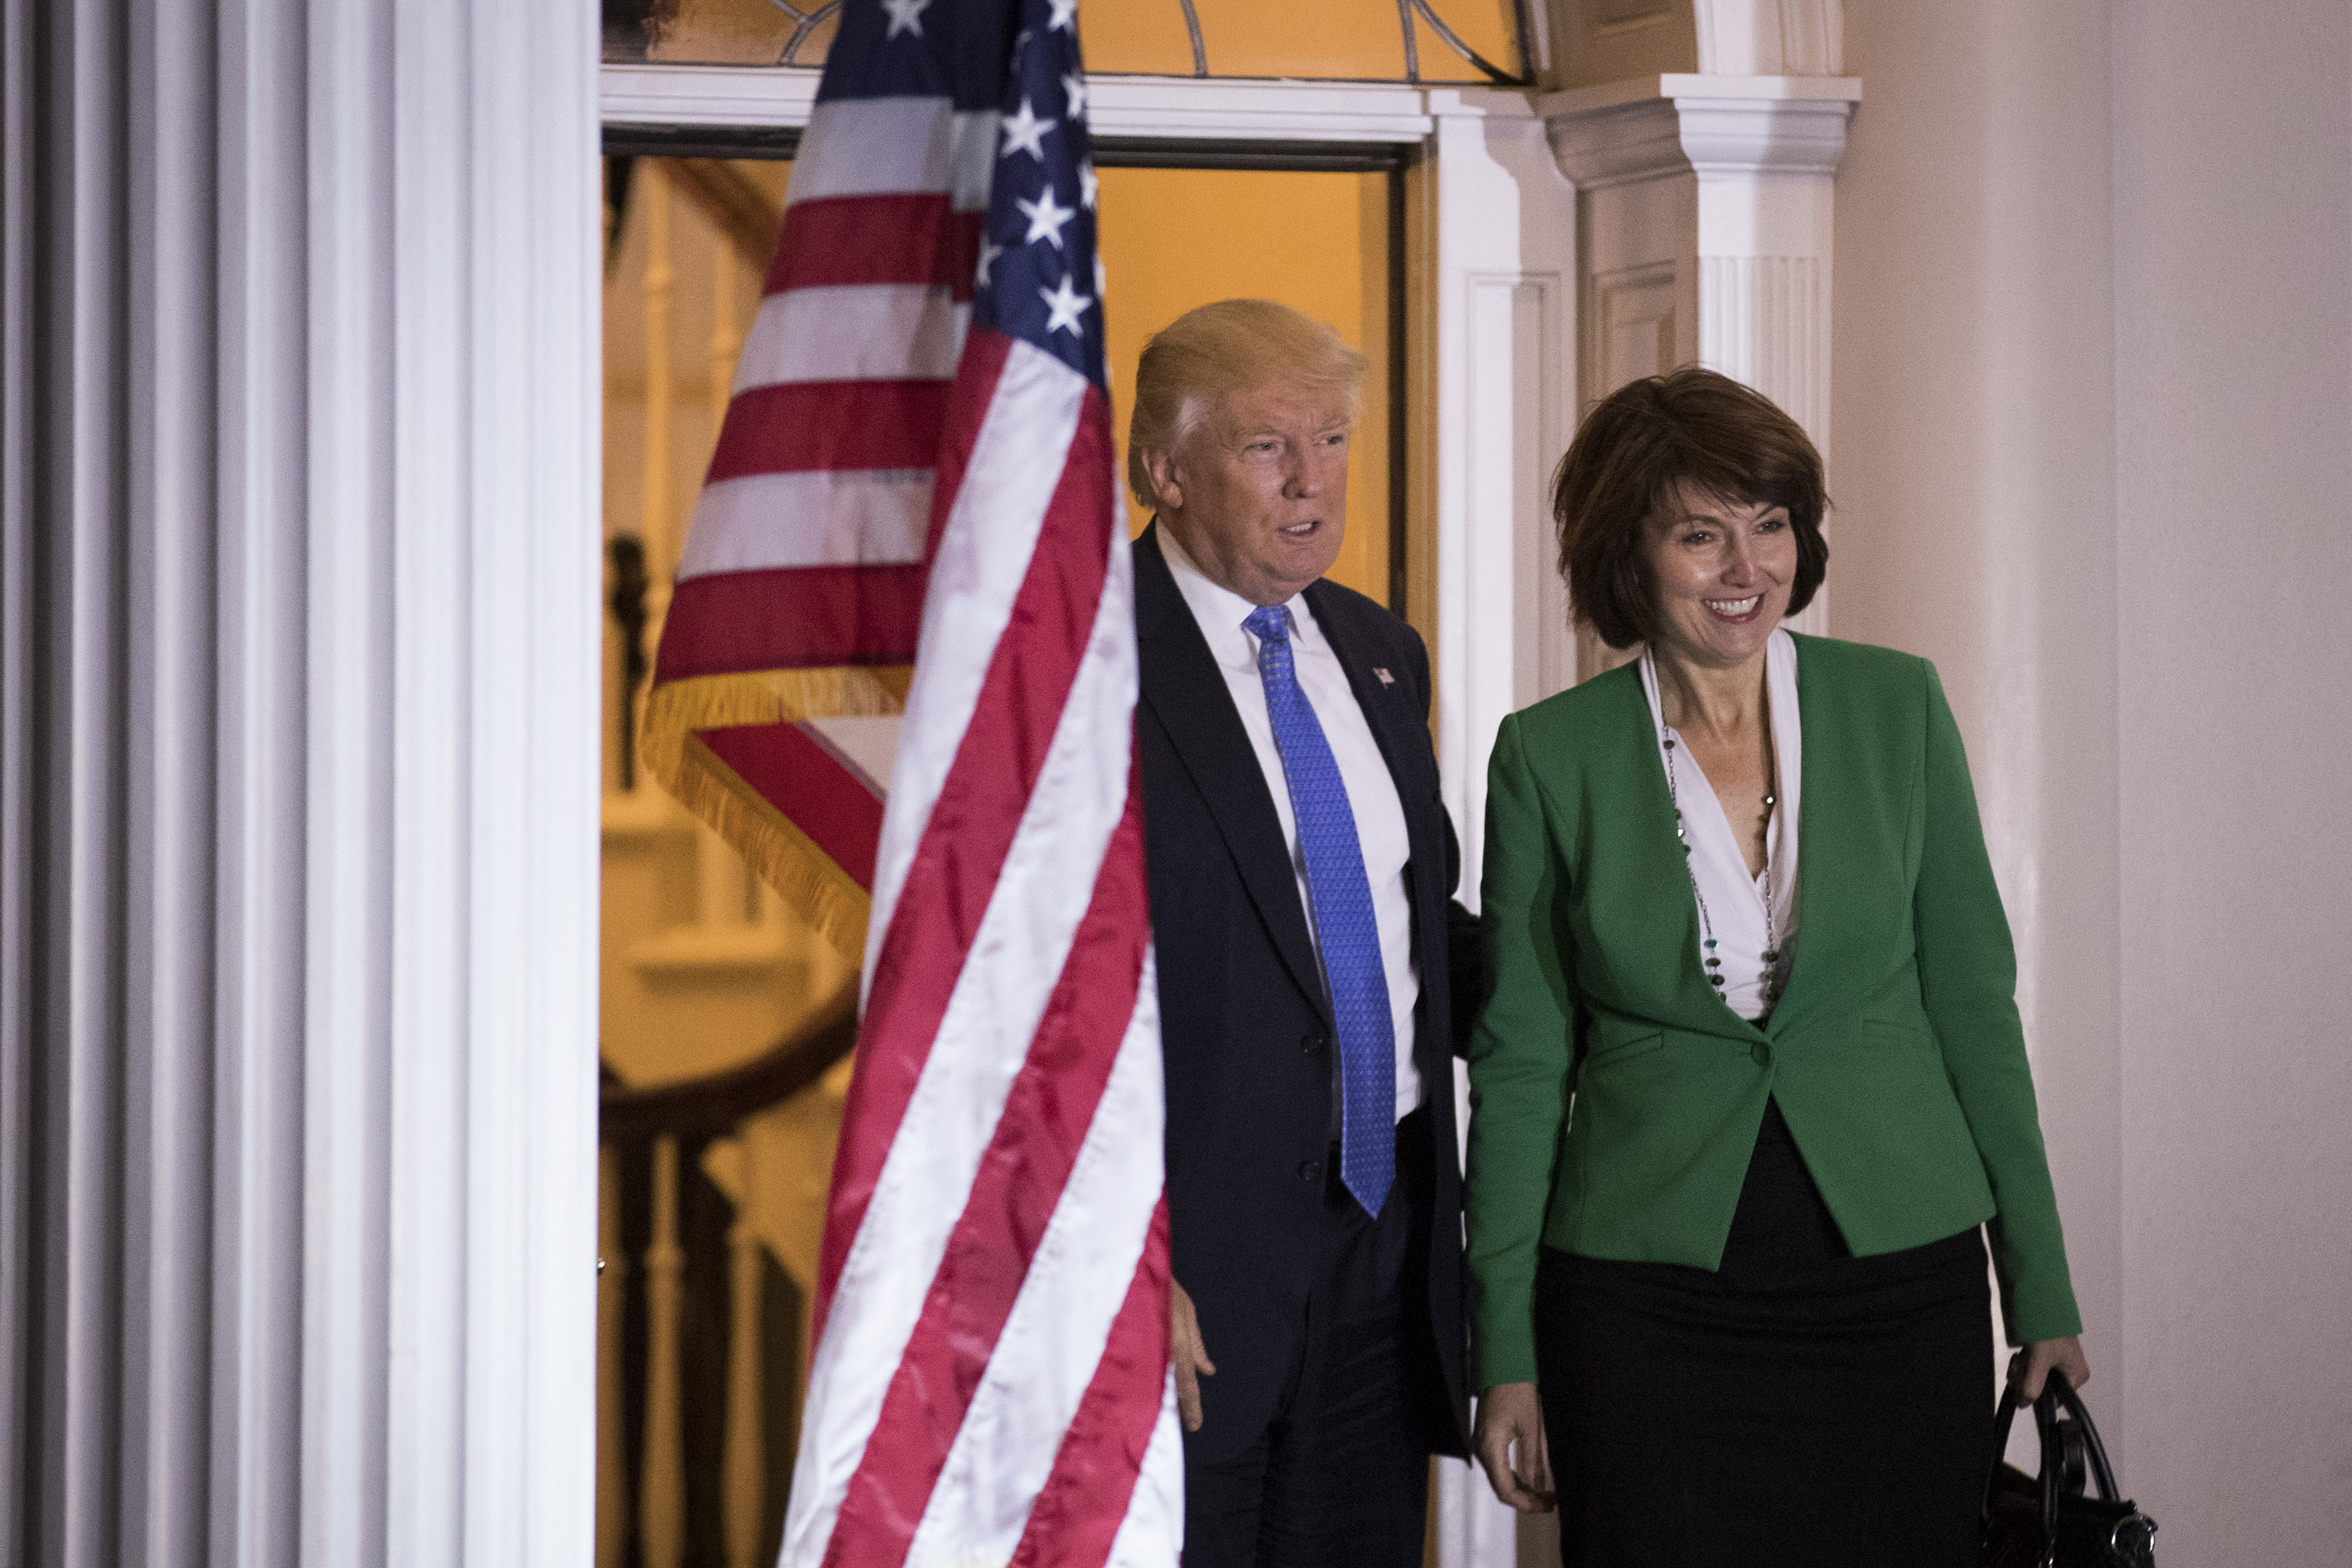 President-elect Donald Trump and U.S. Rep. Cathy McMorris Rodgers (R-WA) pose for a photo before their meeting at Trump International Golf Club, November 20, 2016 in Bedminster Township, New Jersey. (Drew Angerer/Getty Images)